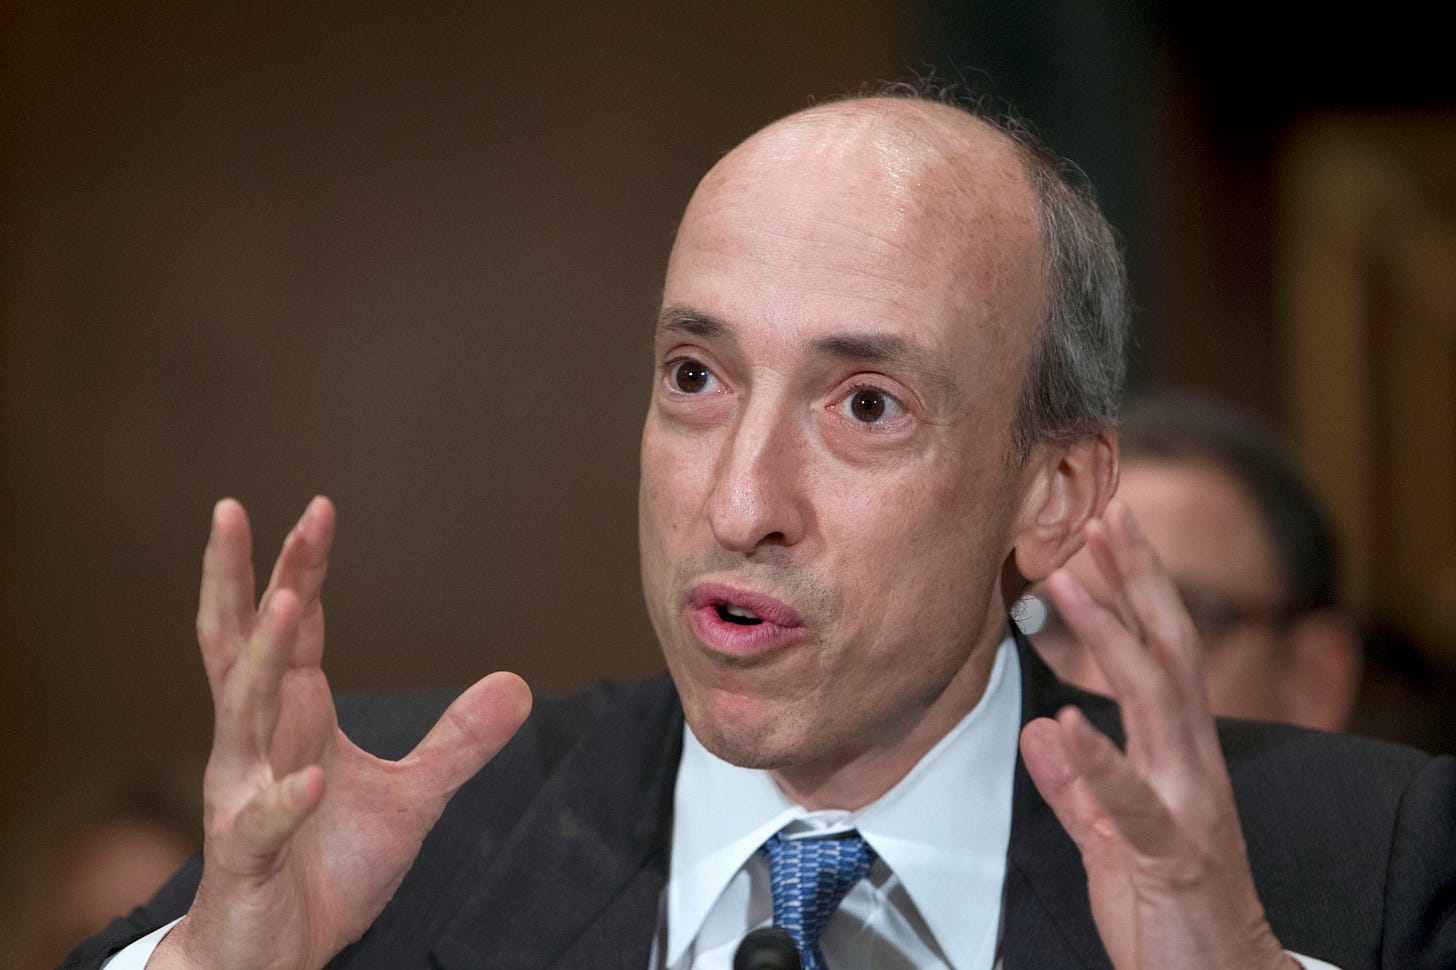 Watch out Wall Street, Gary Gensler tapped to head SEC